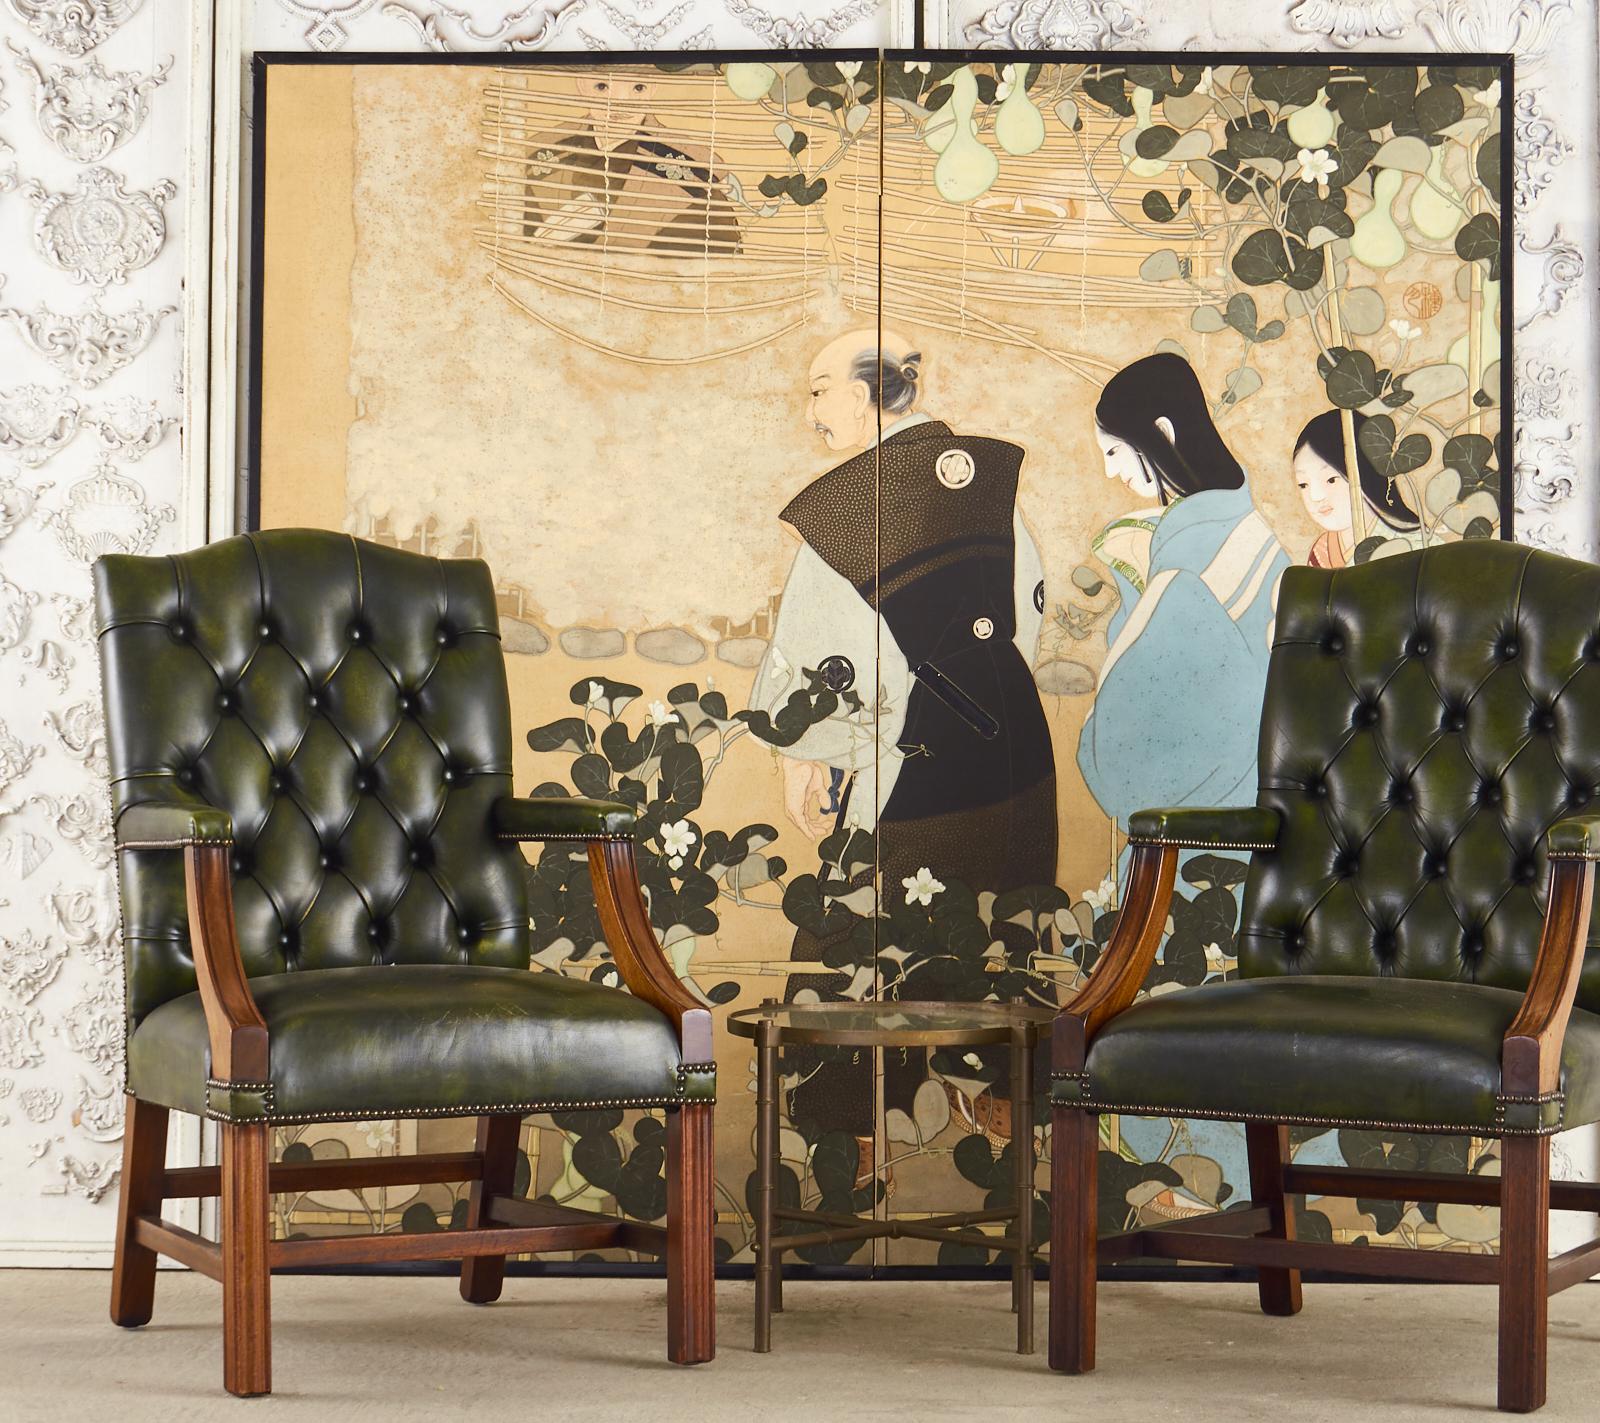 Regal pair of English Gainsborough library armchairs made in the Georgian taste. The chairs feature a hardwood mahogany frame covered with a rich, dark green leather having a tufted chesterfield style back rest. Classic Gainsborough design with a